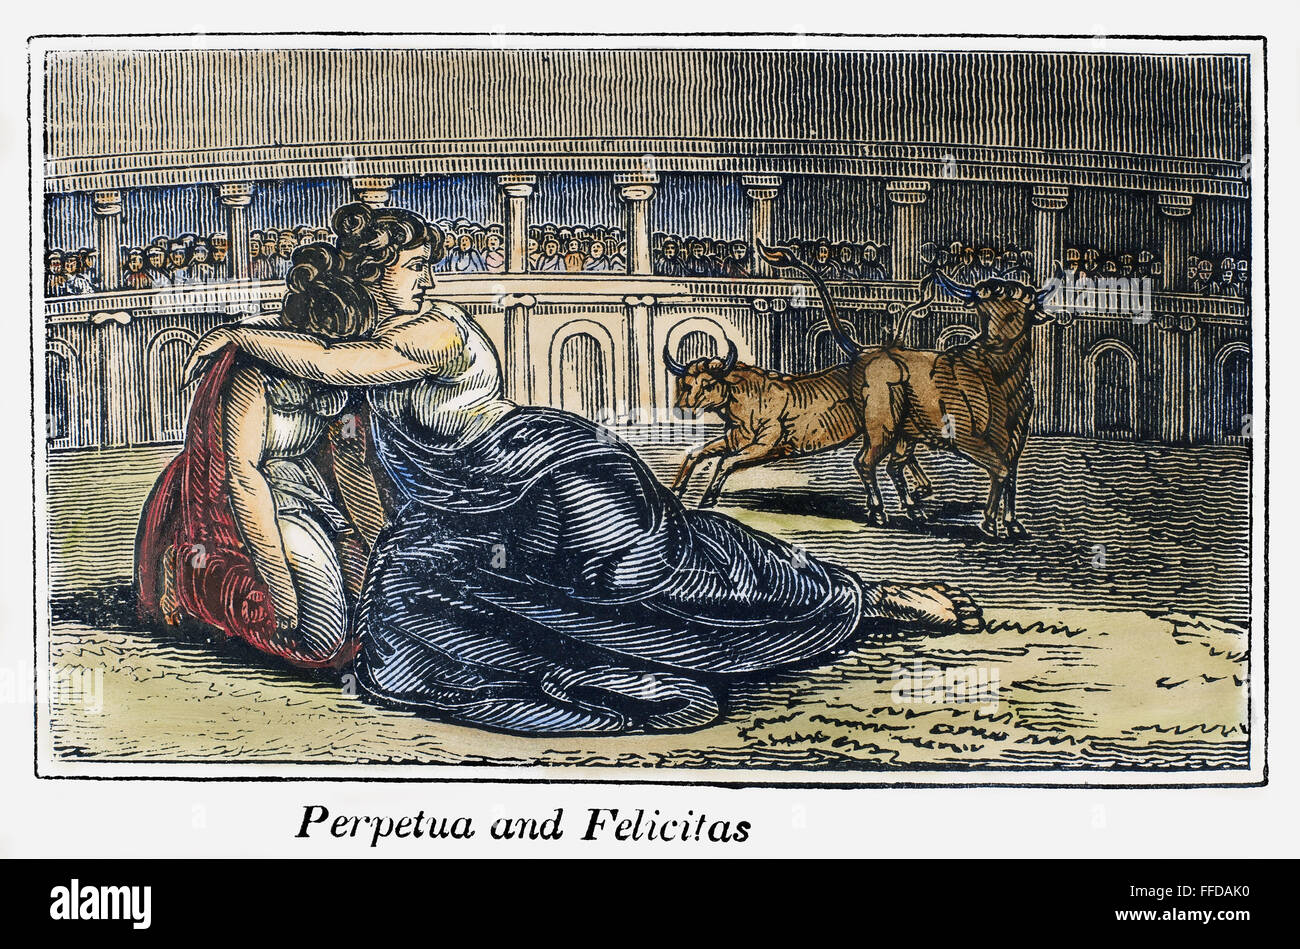 ROME: PERPETUA & FELICITAS. /nMartyrdom of Saints Perpetua and Felicitas at the Roman Colosseum, c203. Wood engraving from an 1832 American edition of John Foxe's 'Book of Martyrs.' Stock Photo